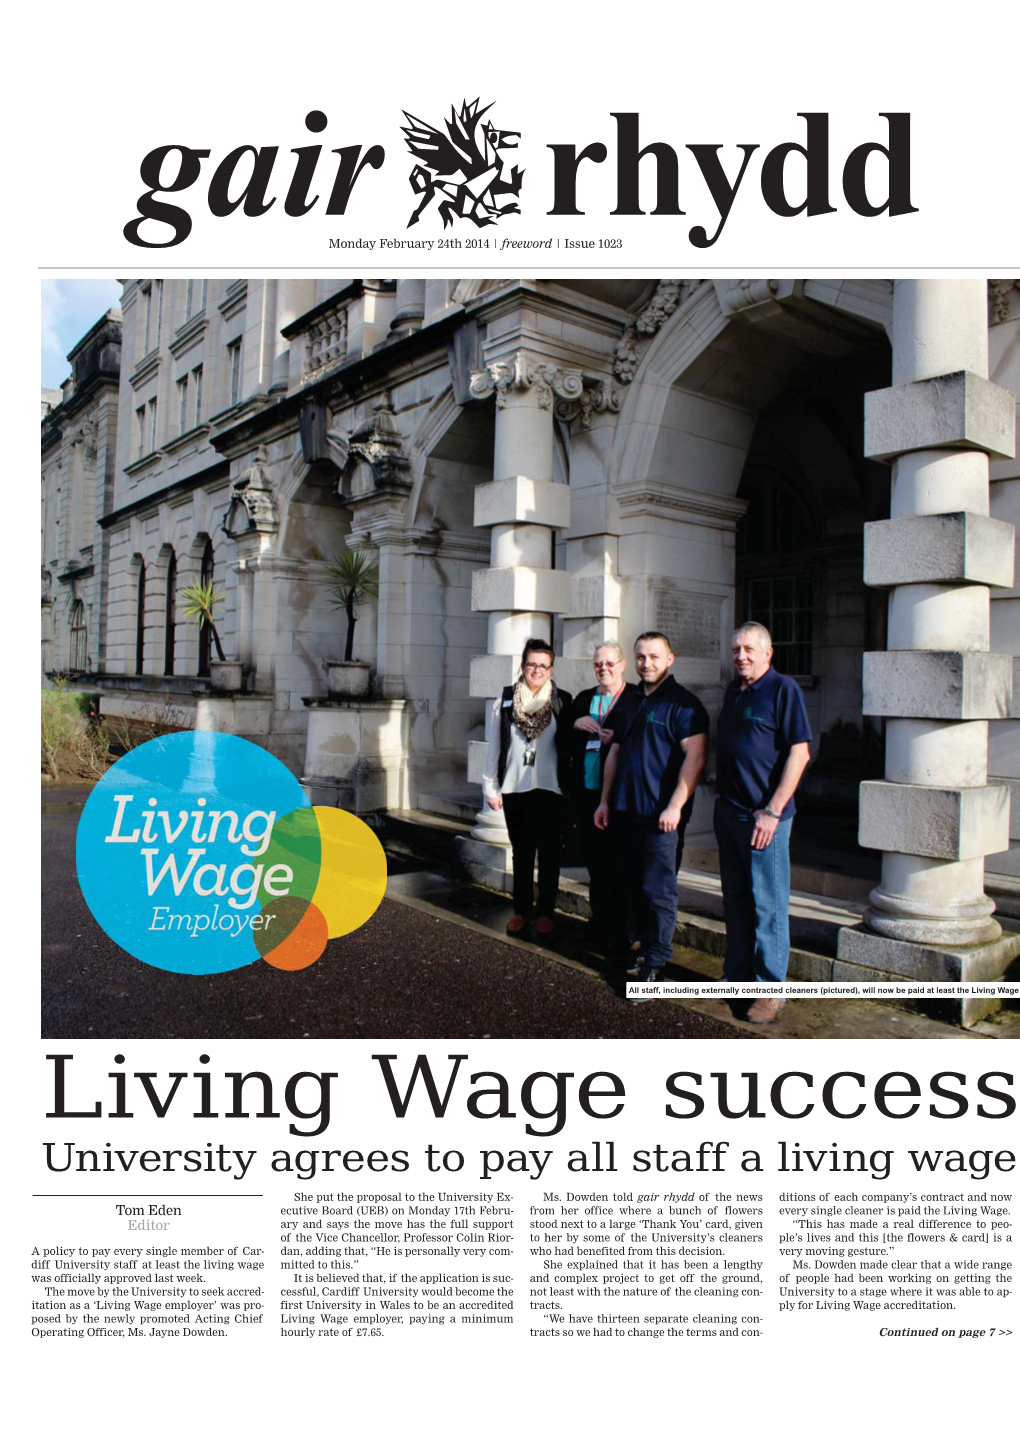 Living Wage Success University Agrees to Pay All Staff a Living Wage